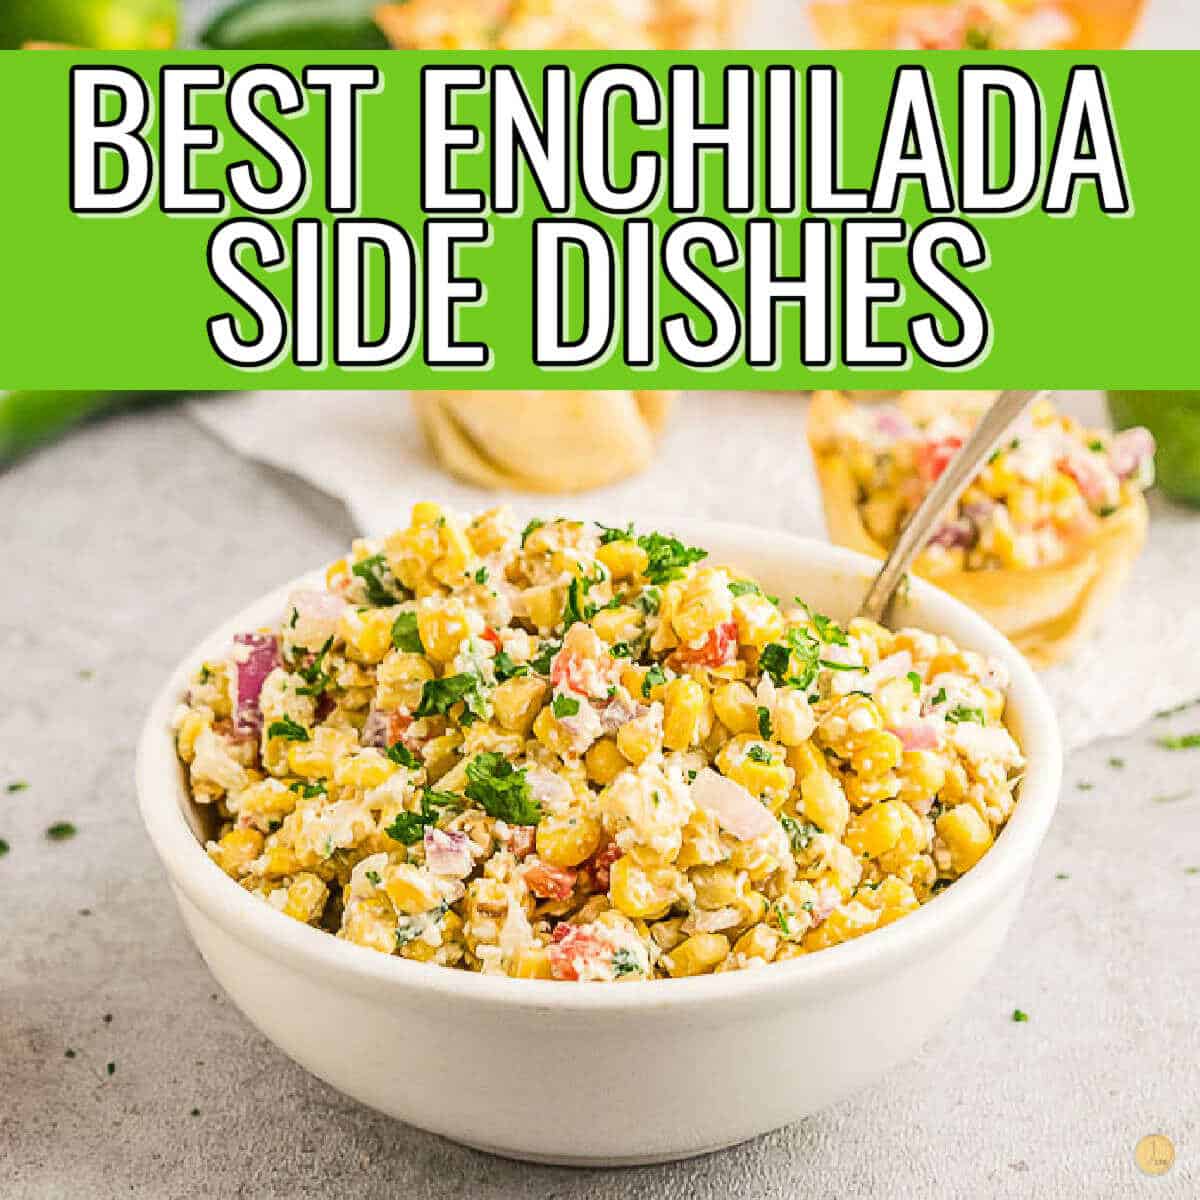 bowl of corn salad with text "best enchilada side dishes"